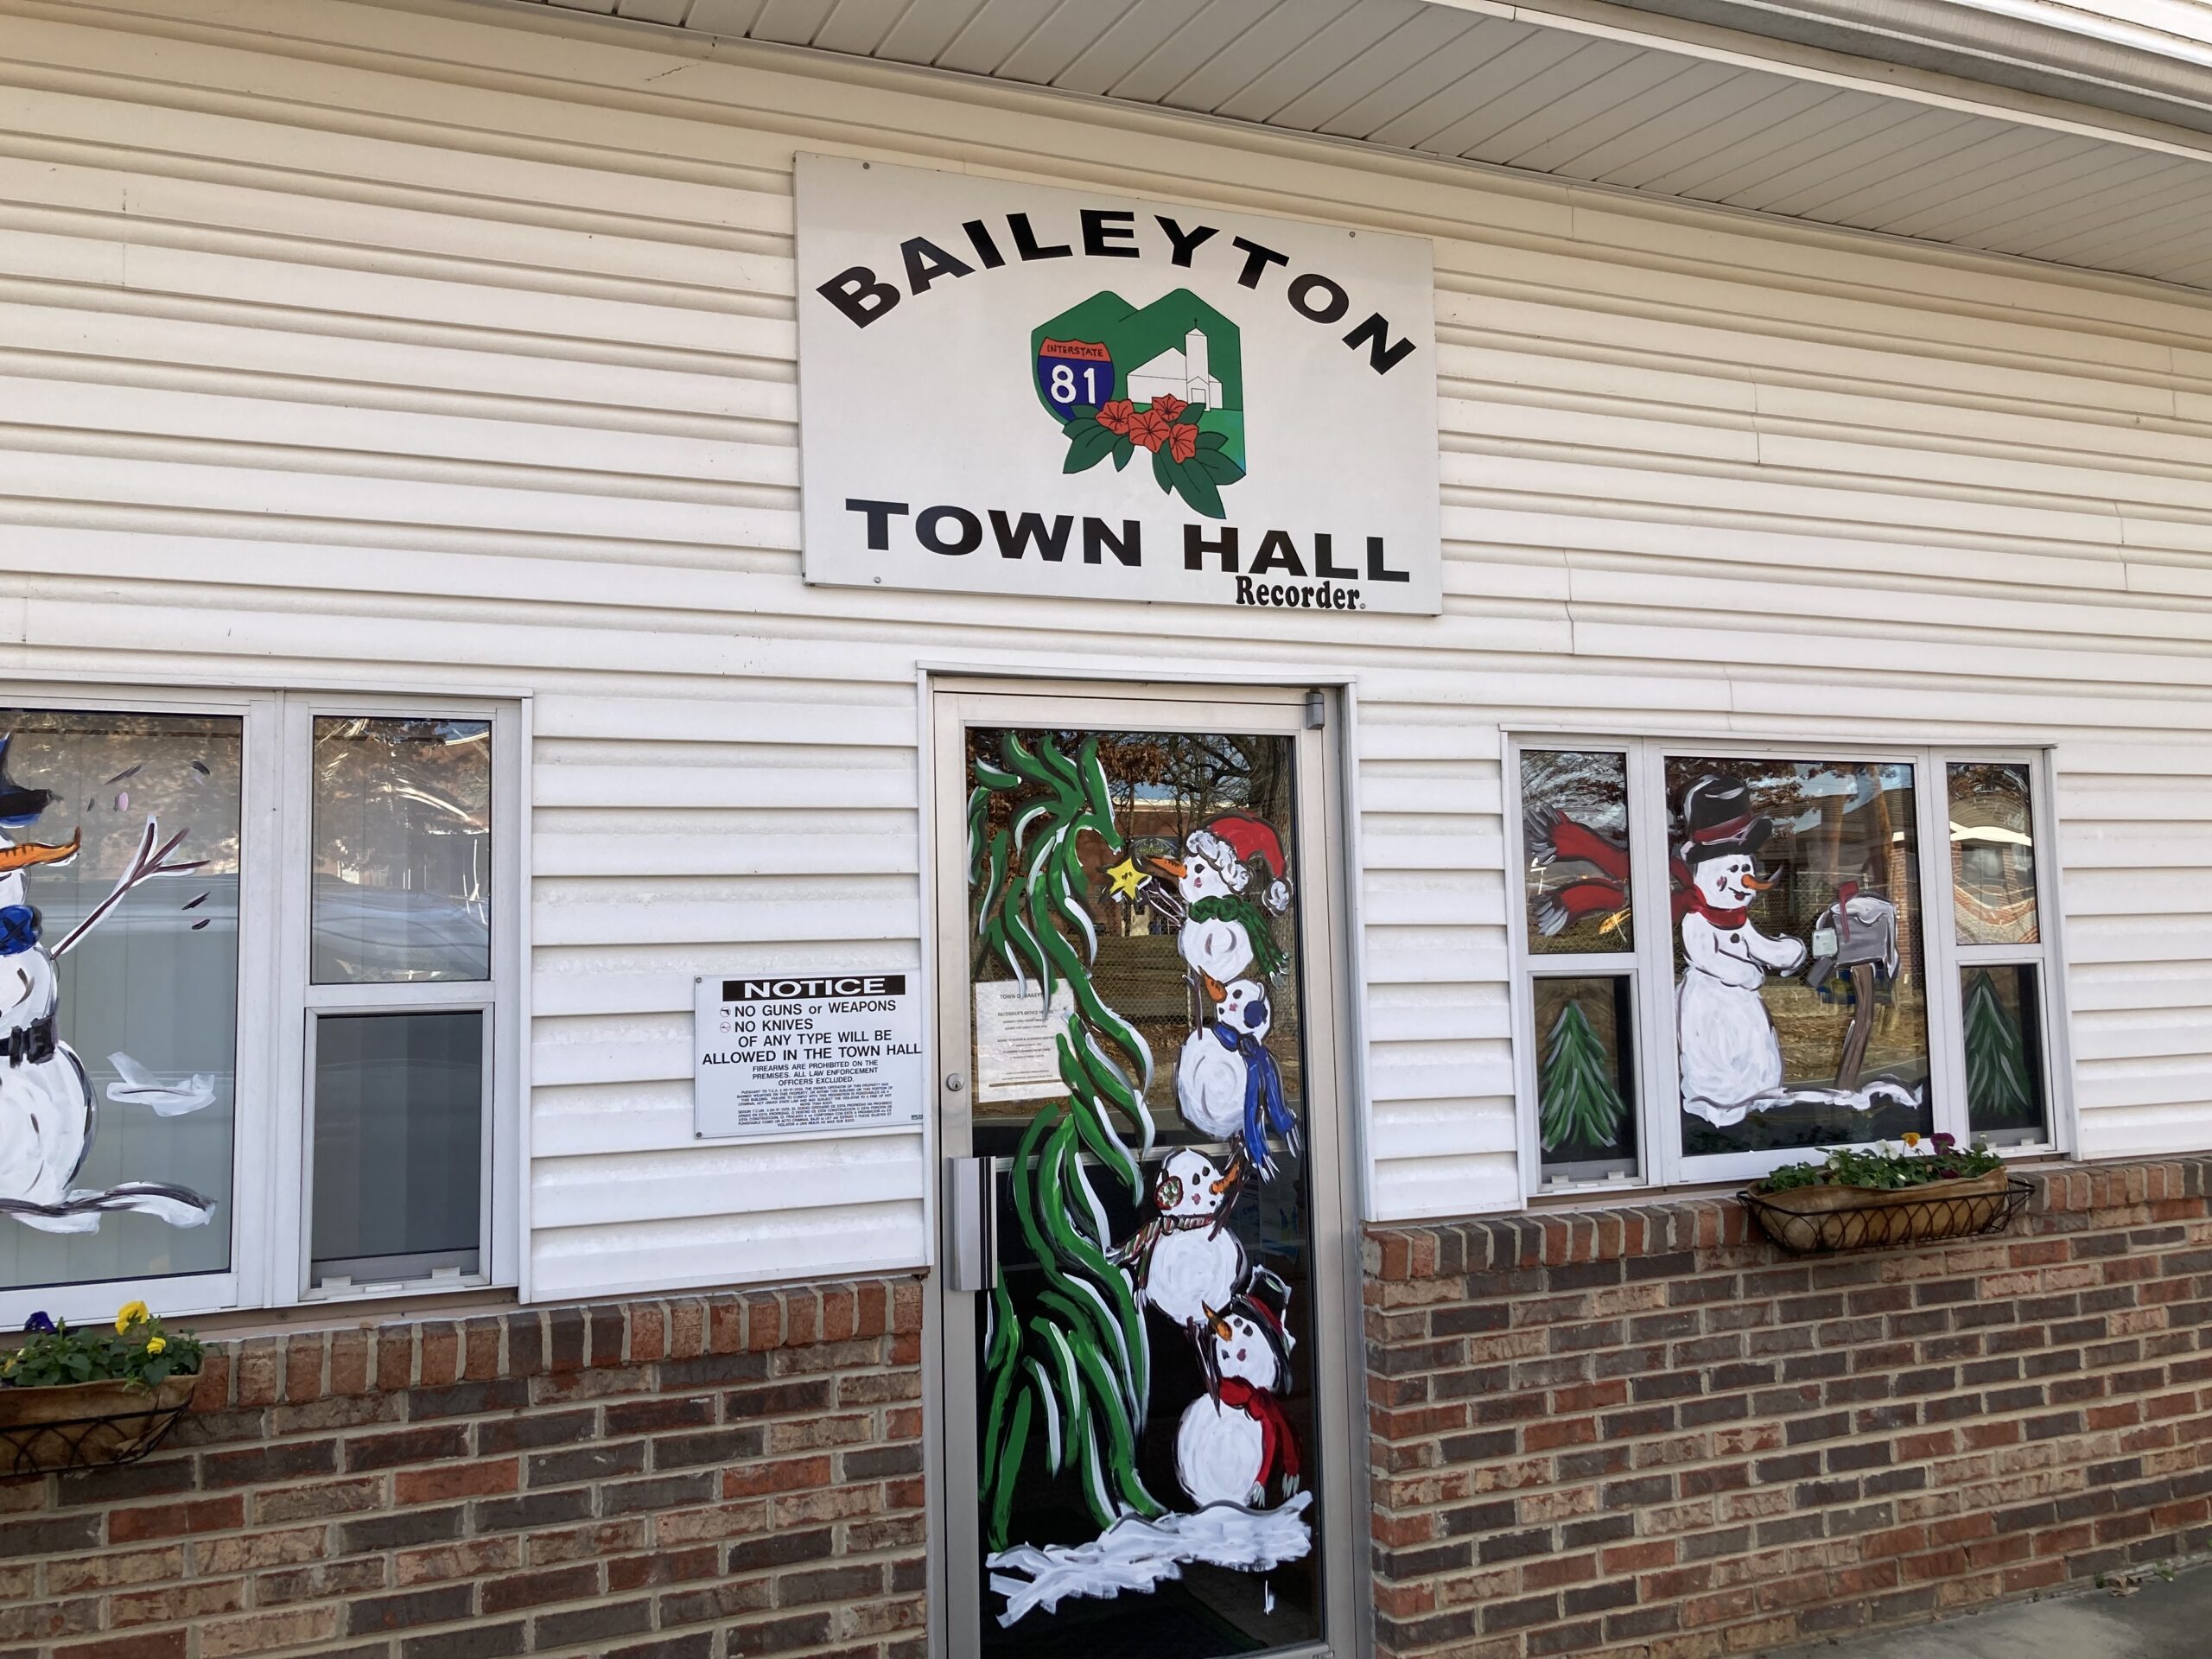 Baileyton Planning Commission Meeting